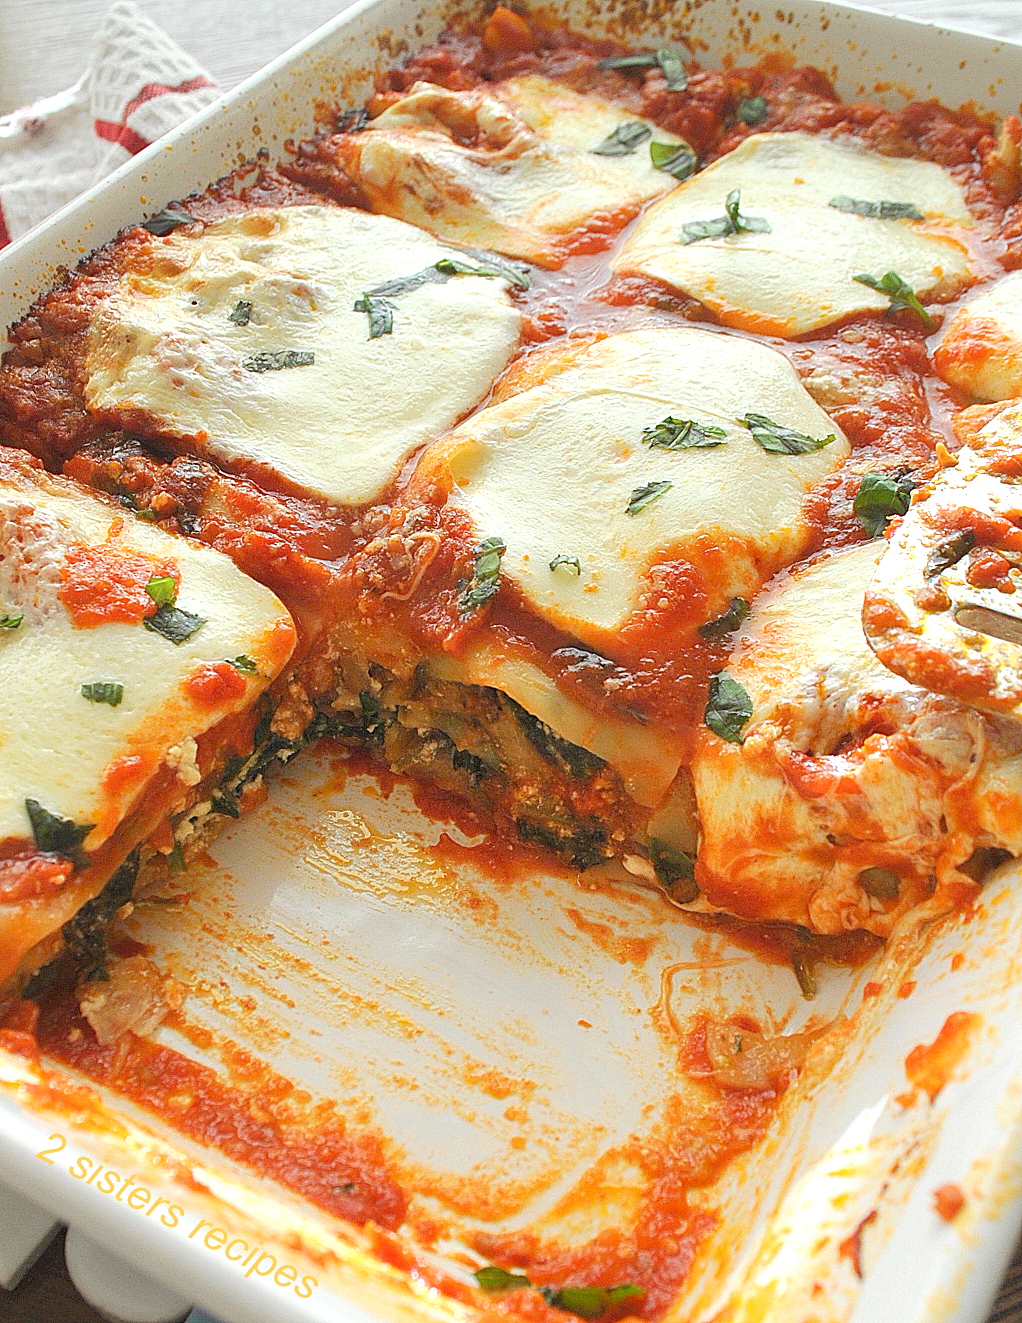 Homemade Lasagna with Vegetables. by 2sistersrecipes.com